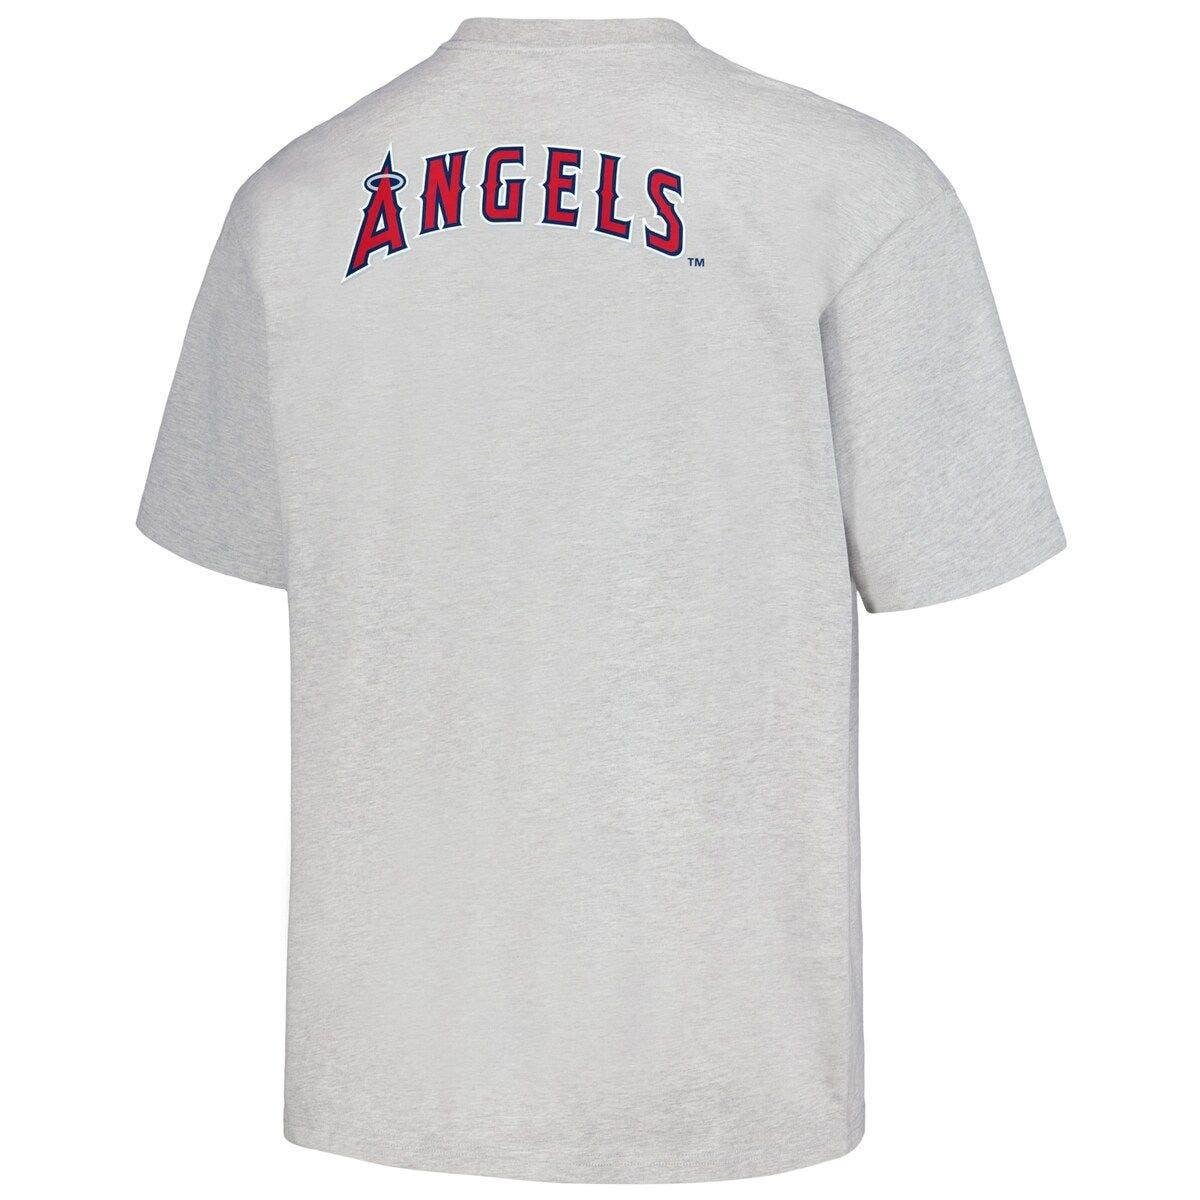 Pleasures Los Angeles Angels Mascot T-shirt At Nordstrom in Gray